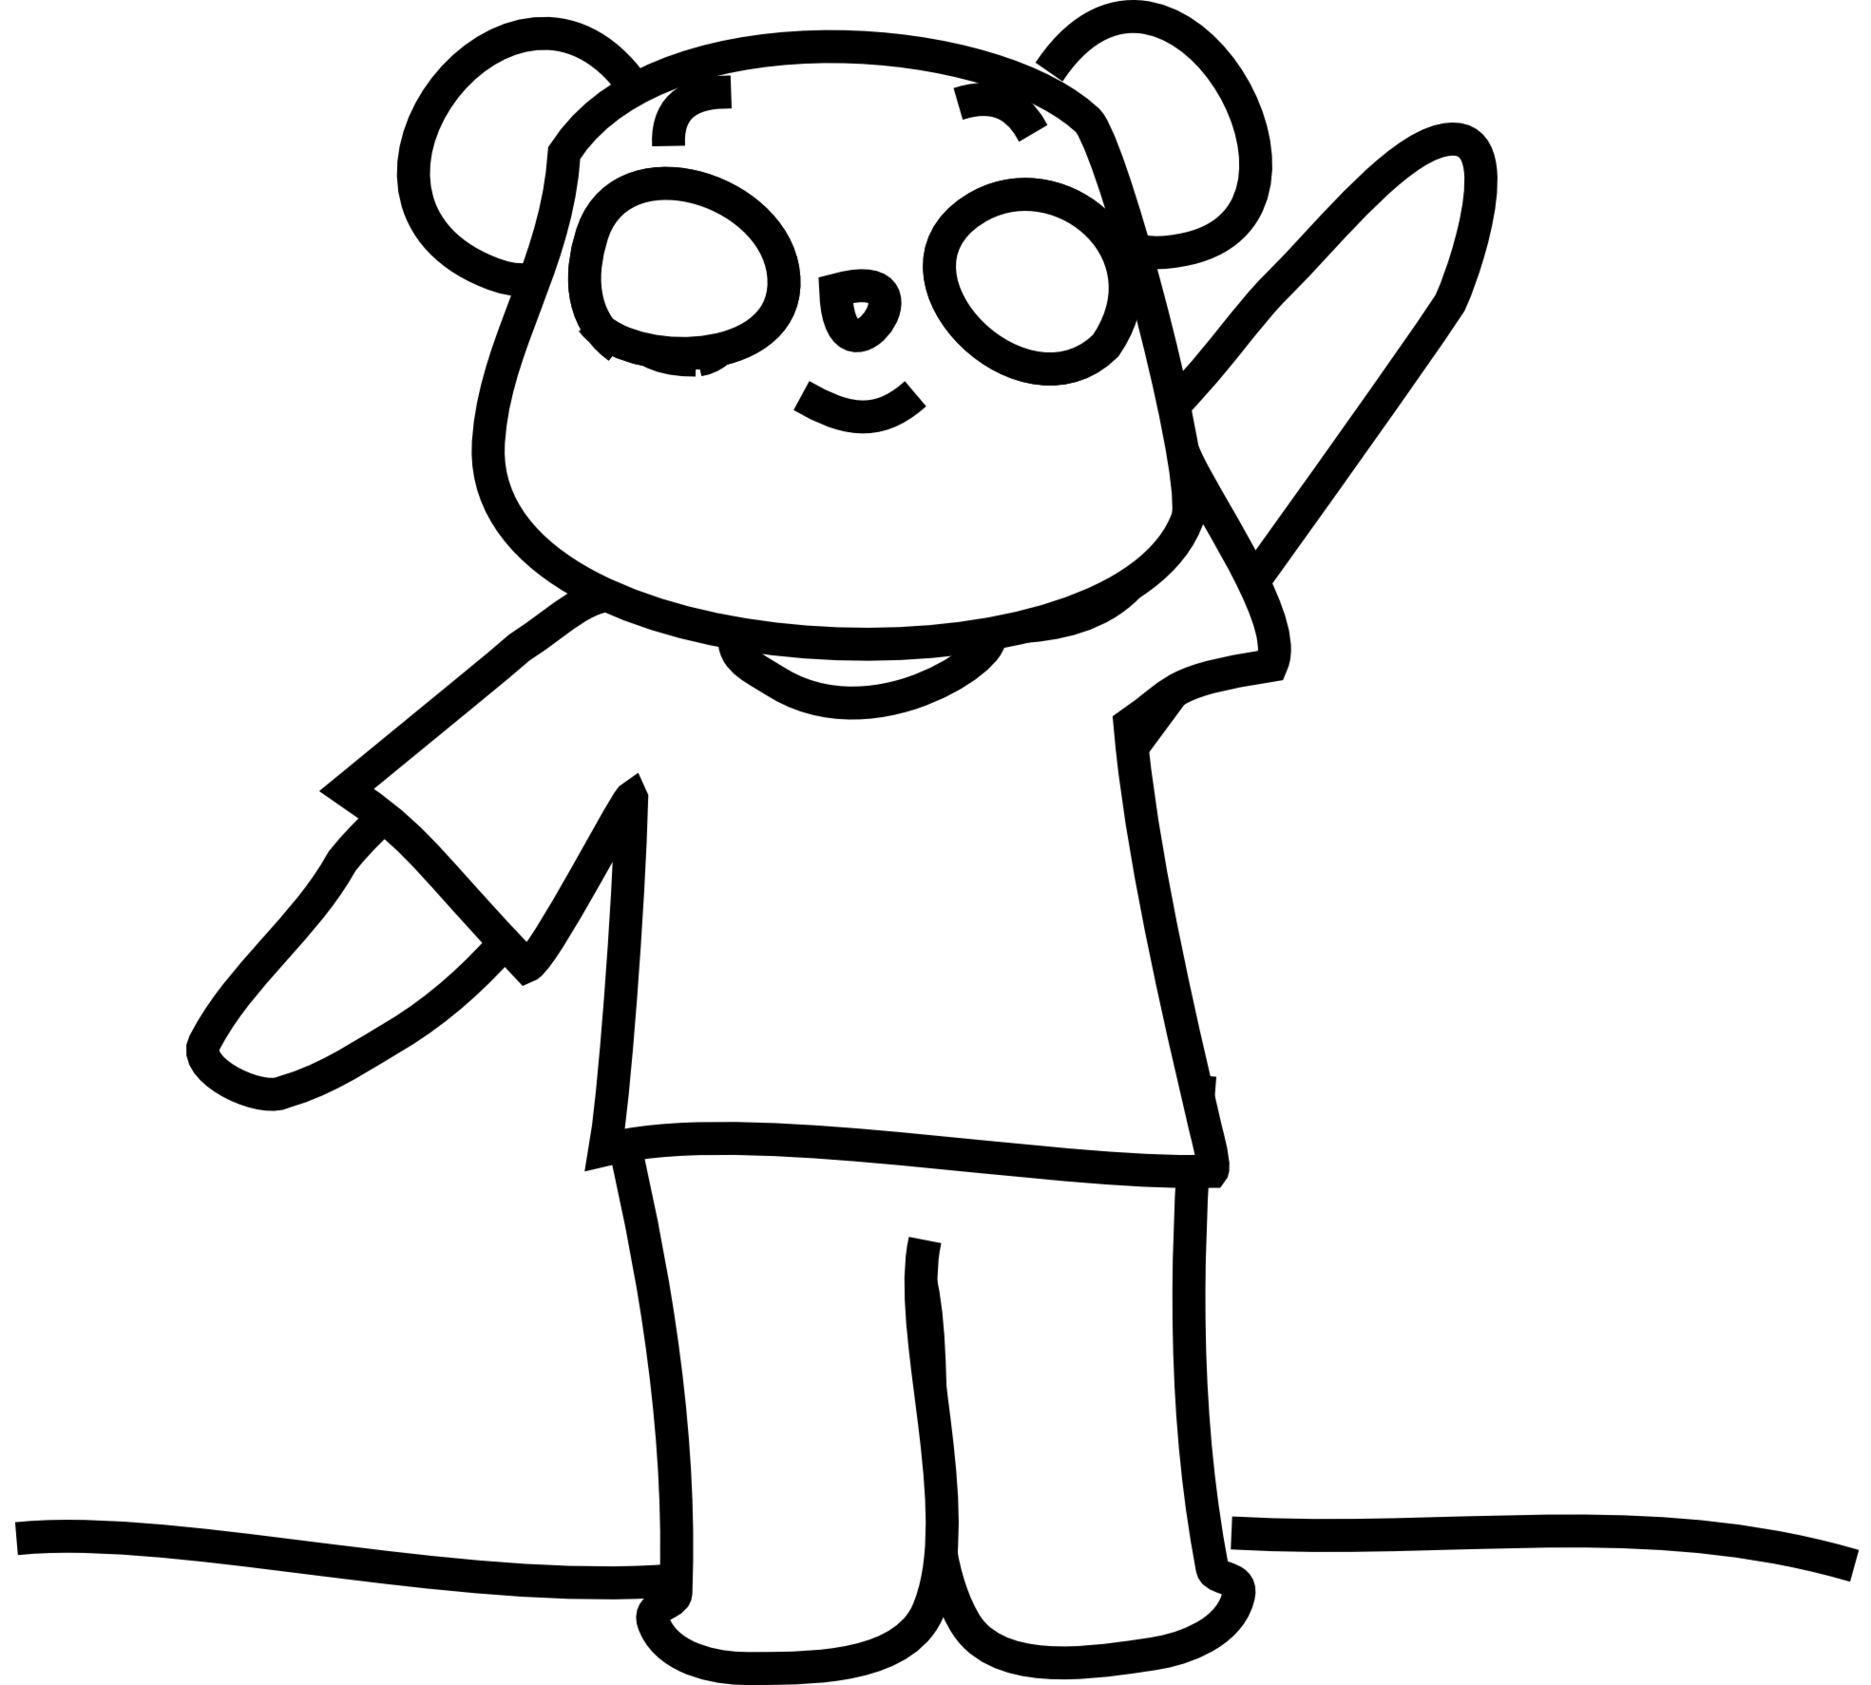 Teddy bear  black and white teddy bear in black and white clipart free to use clip art resource